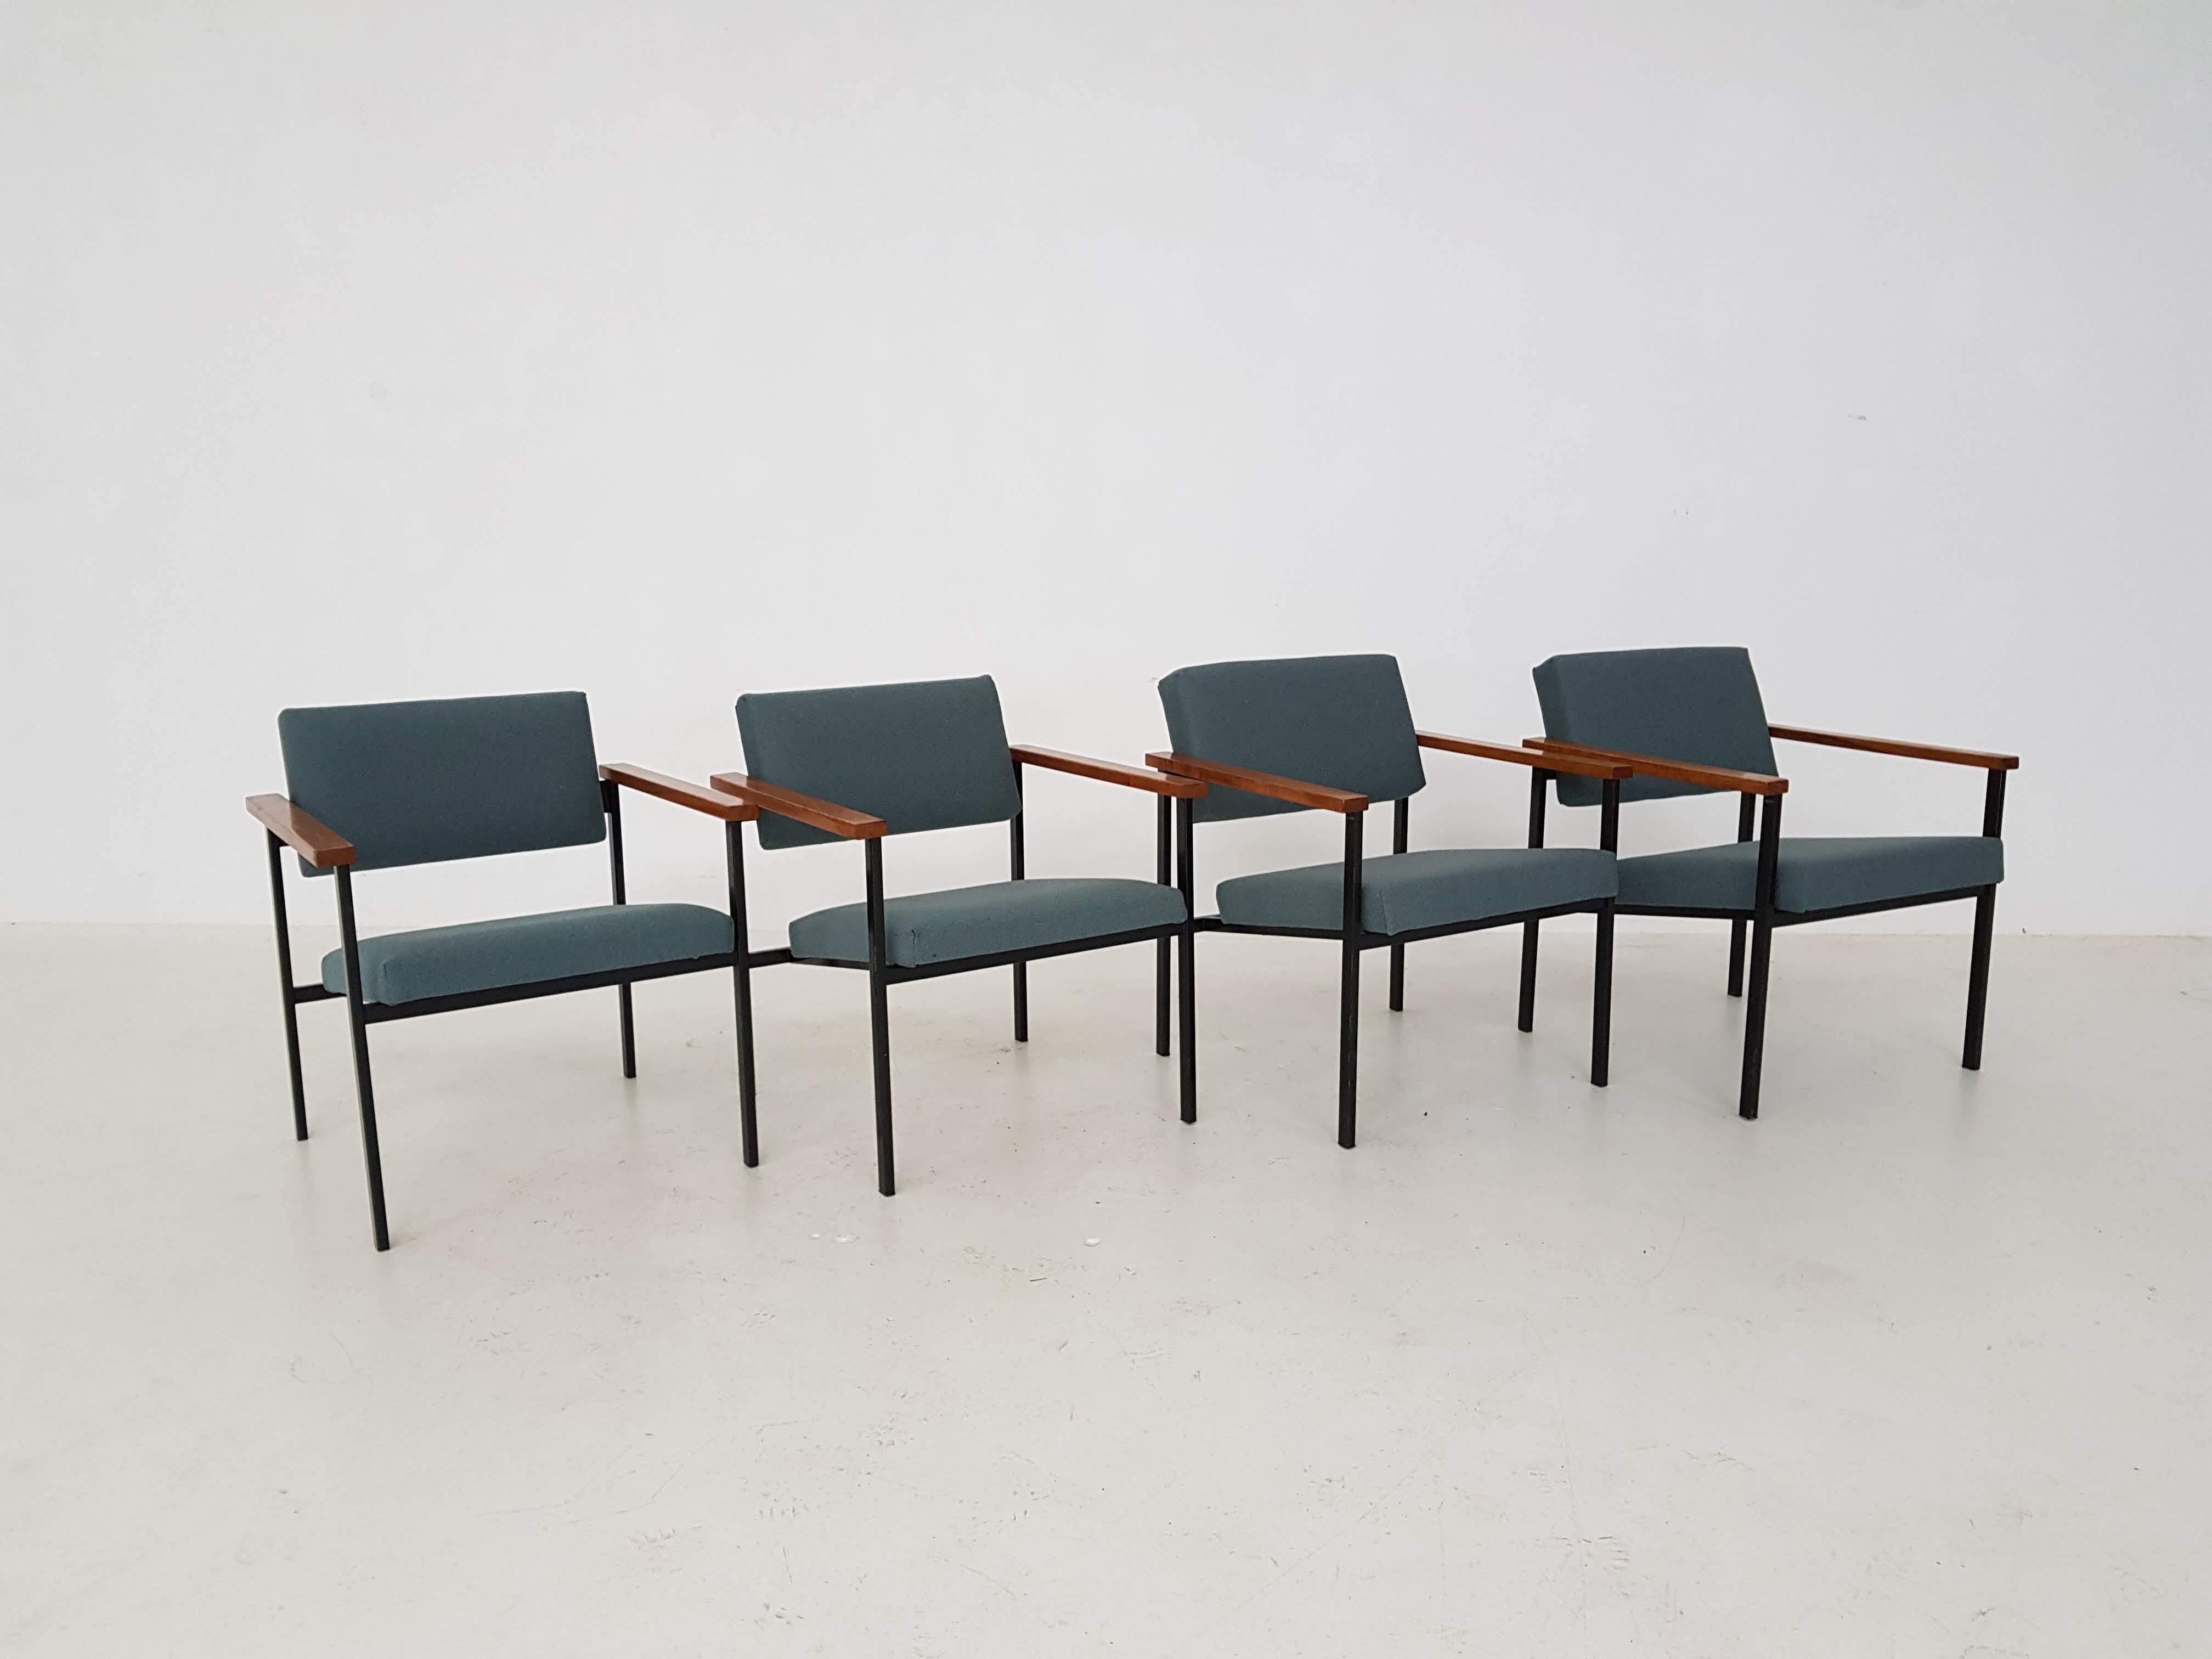 20th Century Set of 4 Dutch Modernist Lounge Chairs, the Netherlands, 1960s